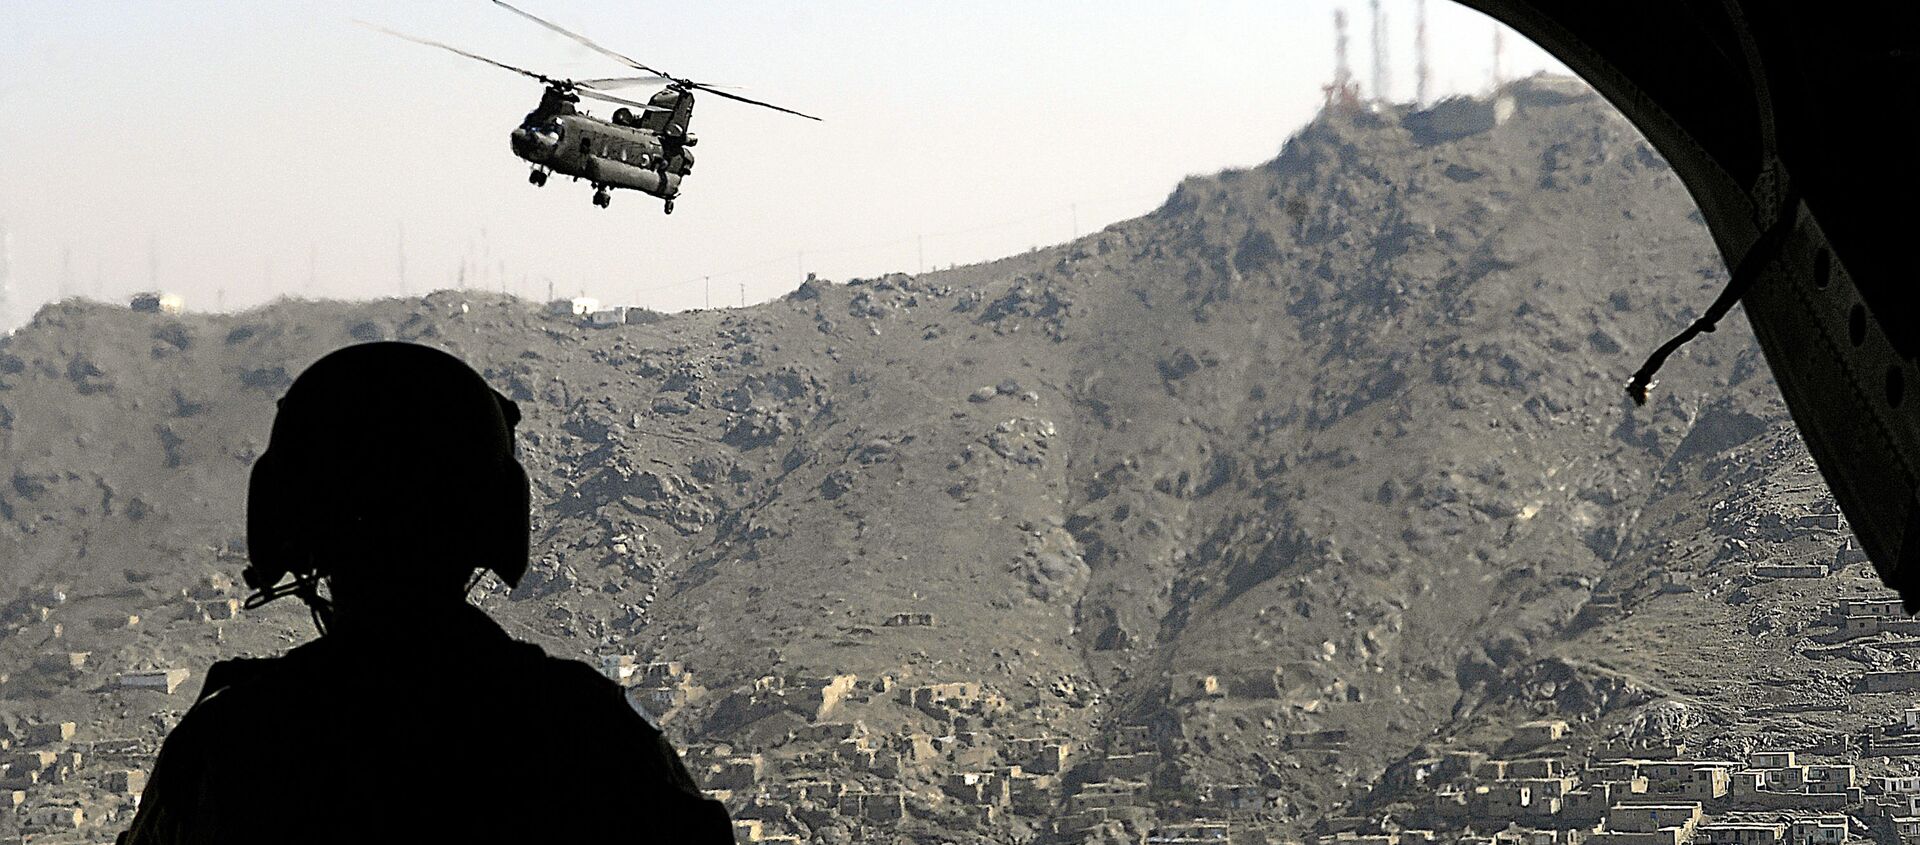 A CH-47 Chinook helicopter flies over Kabul, Afghanistan, June 4, 2007.  DoD photo by Cherie A. Thurlby.  - Sputnik International, 1920, 24.06.2021